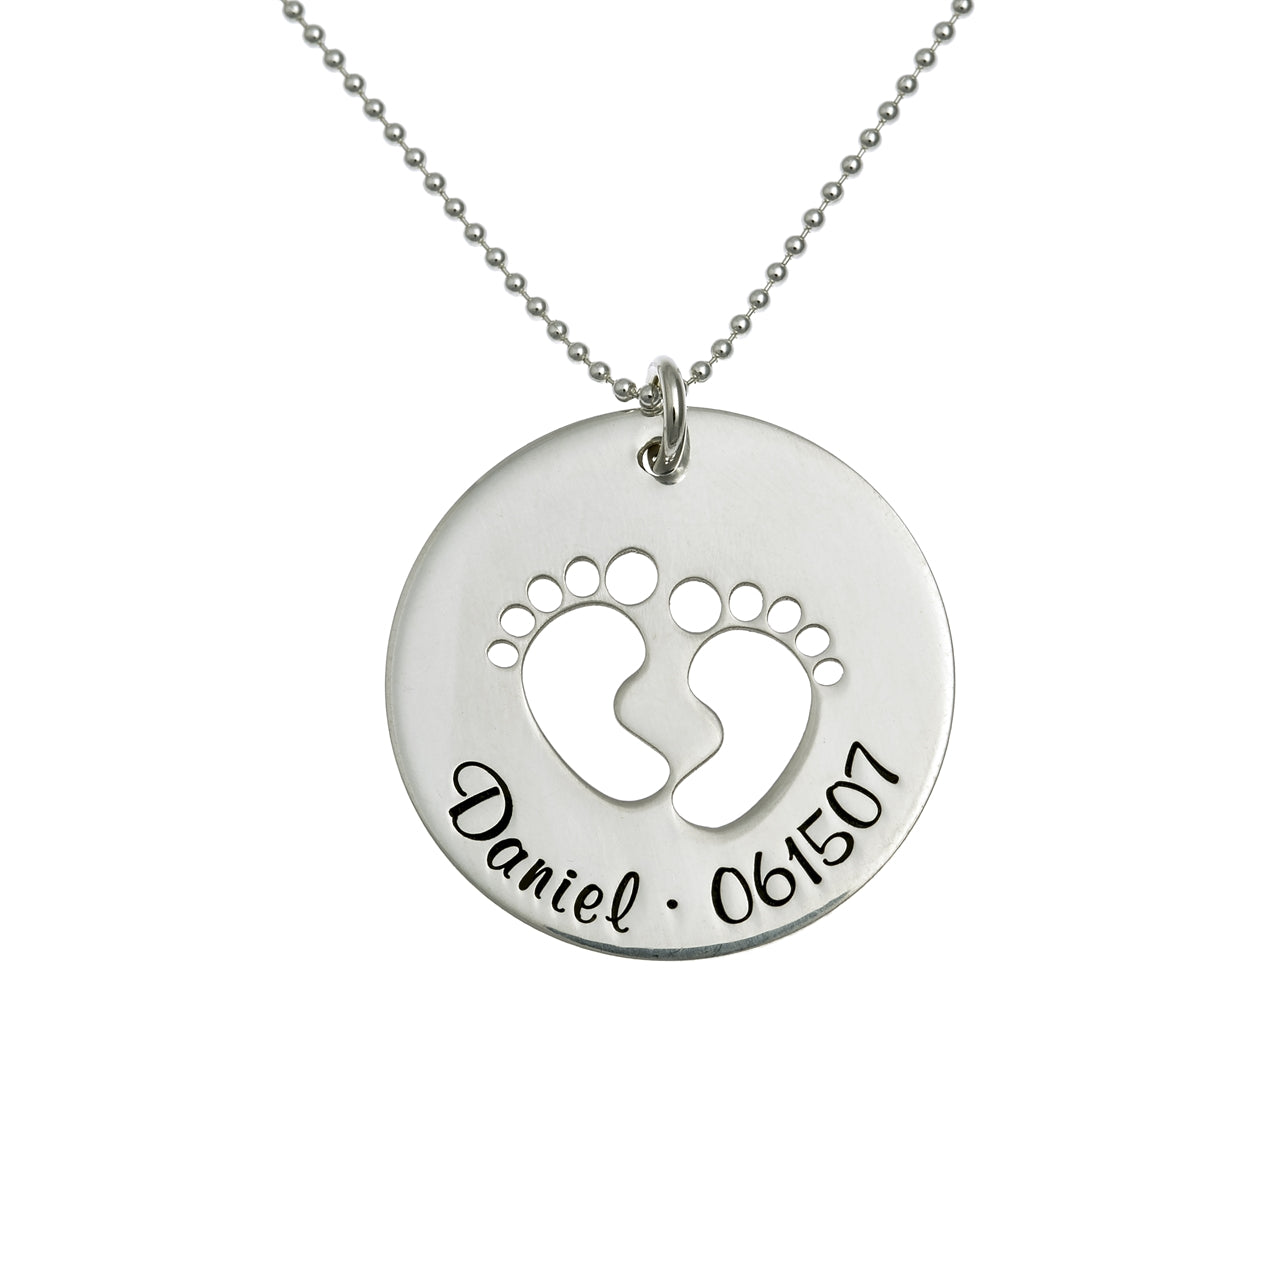 Personalized Mini Feet Name and Date Sterling Silver Necklace